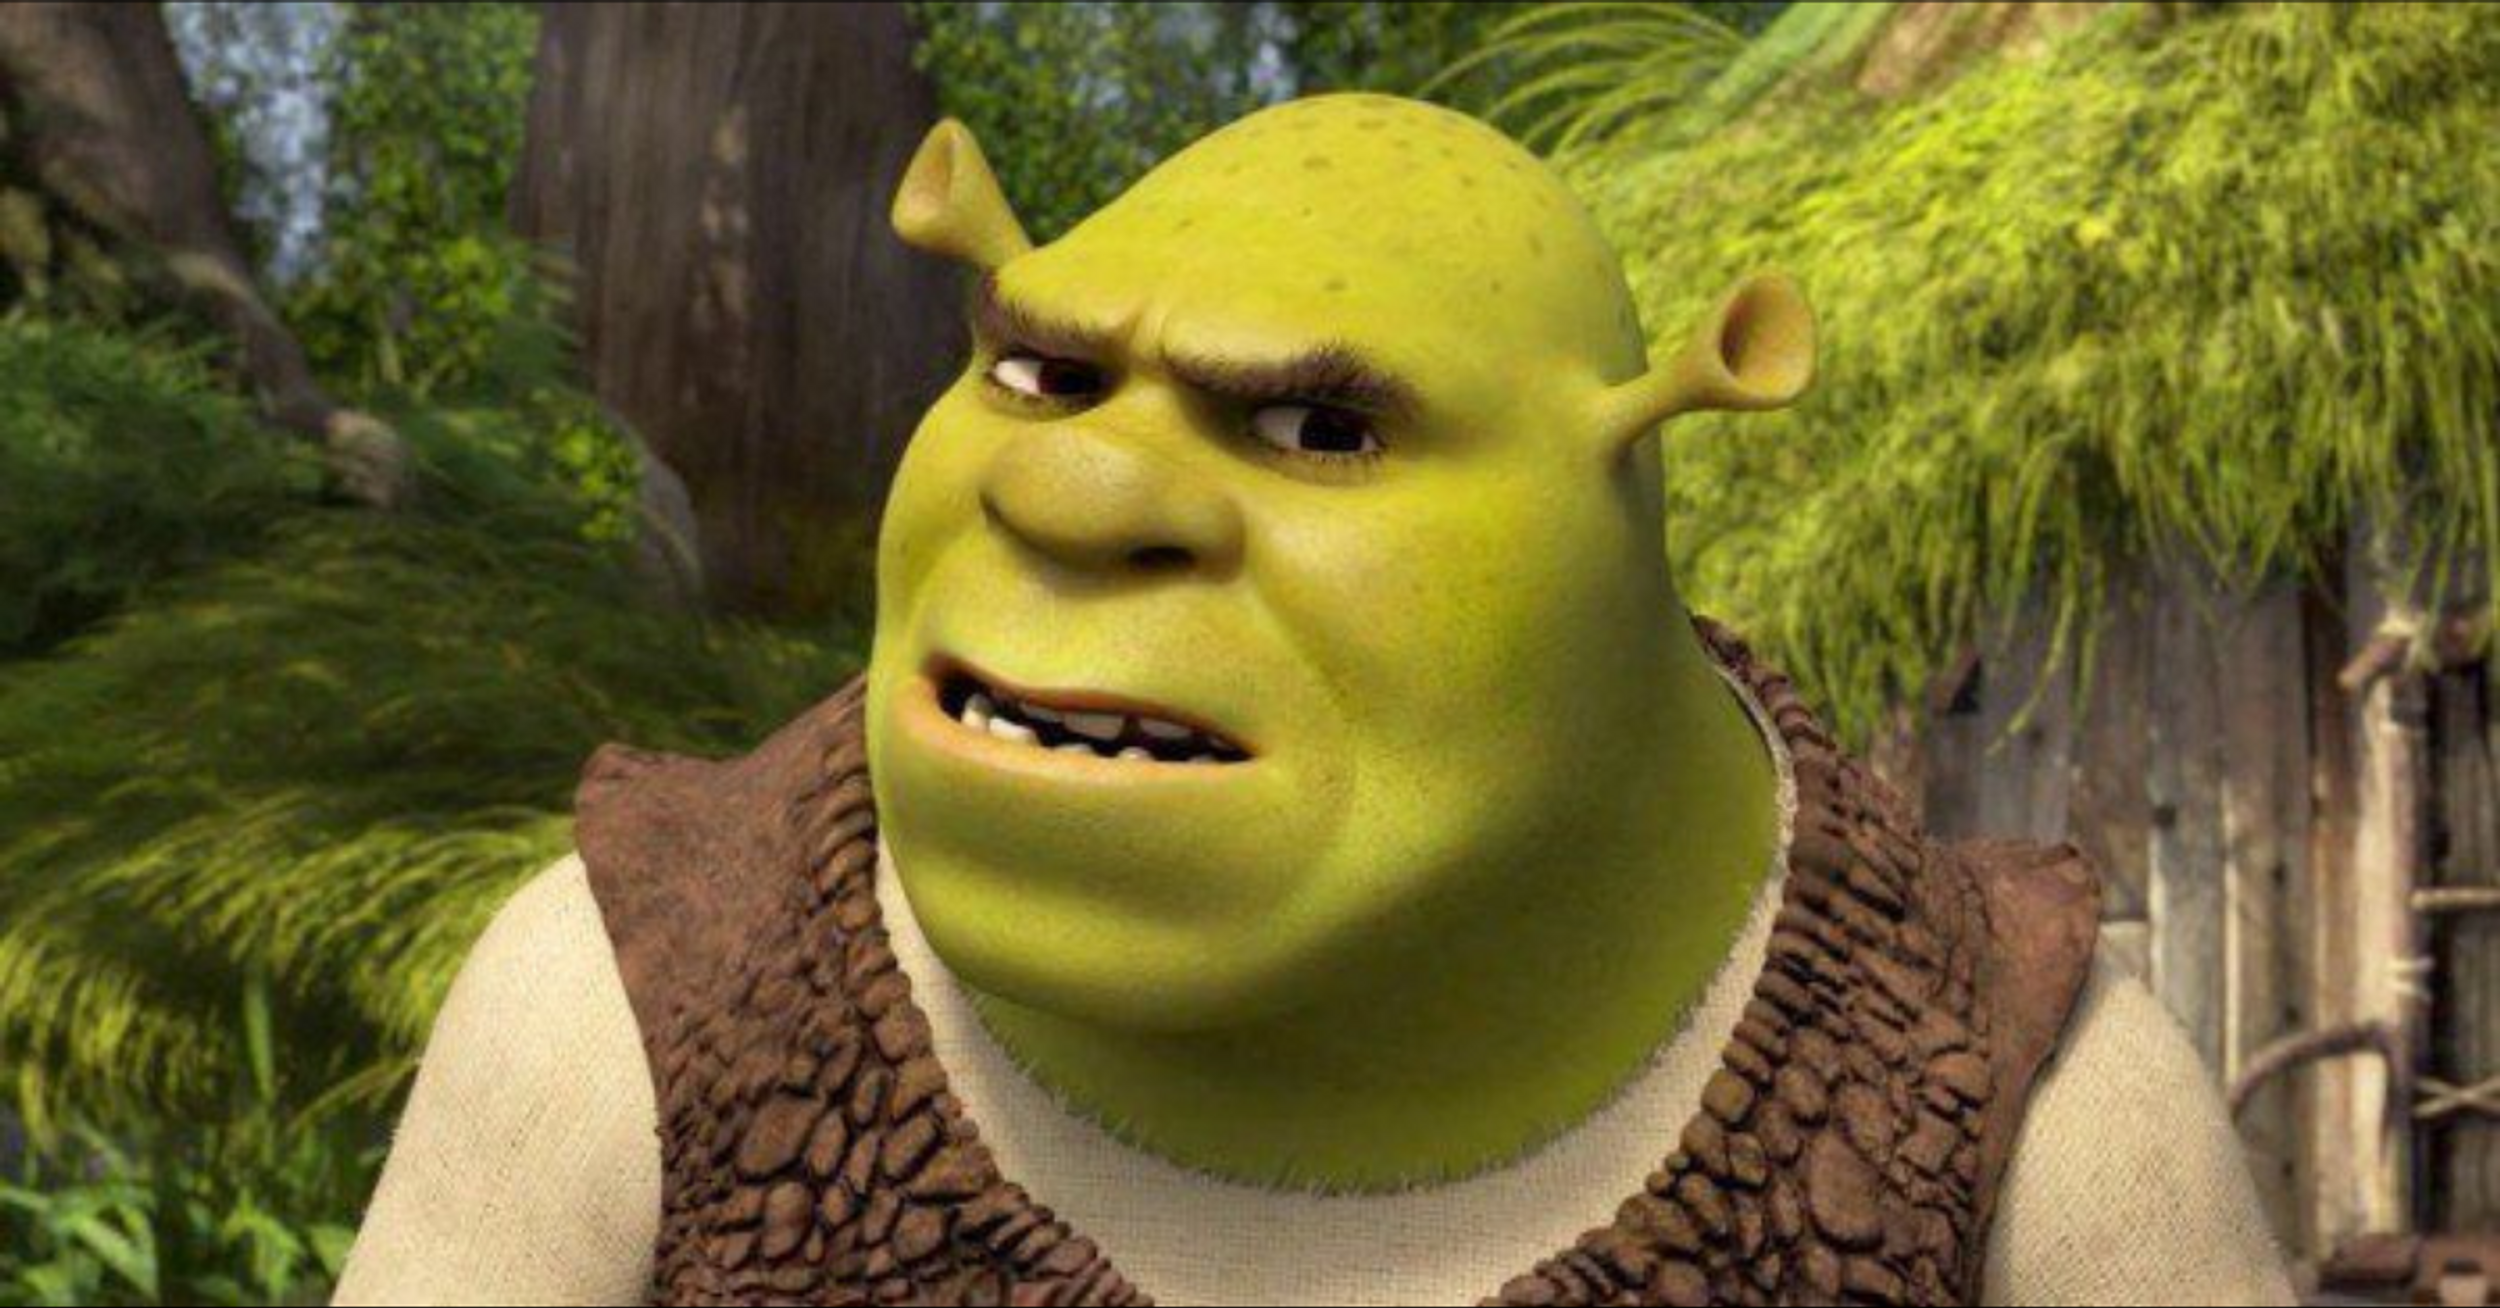 Film Critic Dragged After Penning Scathing Review Of 'Shrek' For The Film's 20th Anniversary